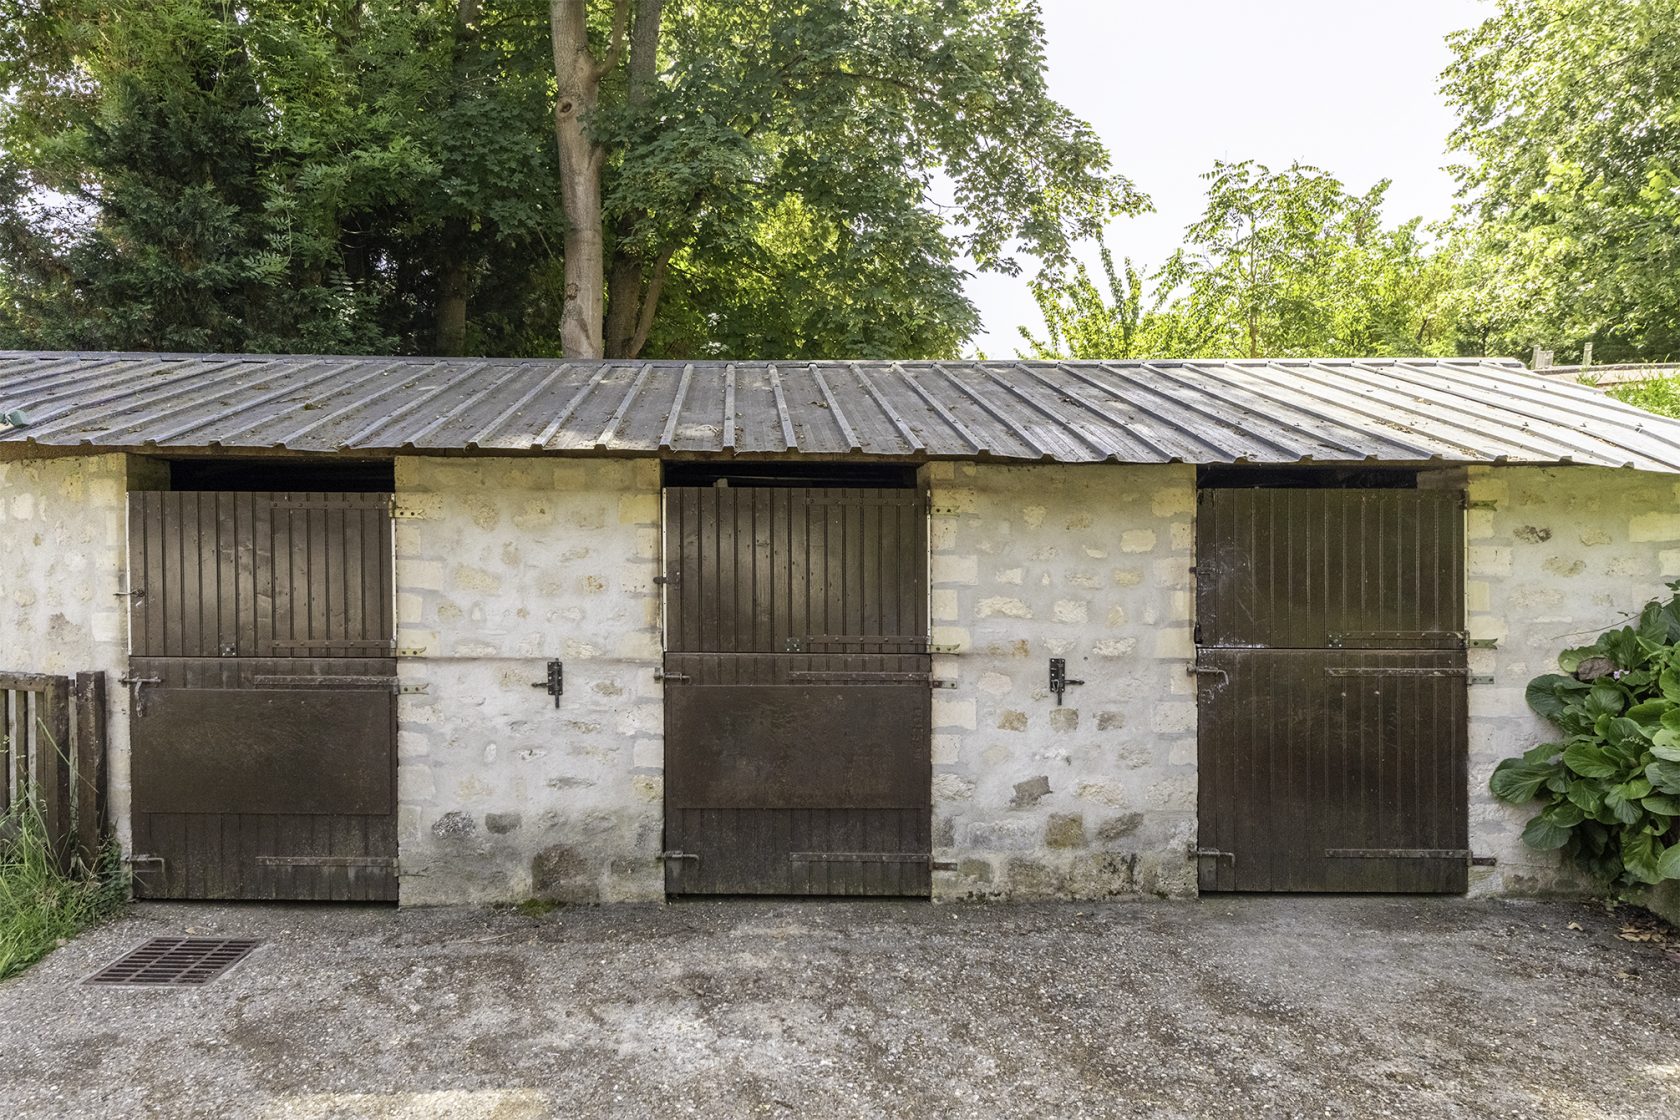 Former tack room converted into a dwelling and its three horse boxes.